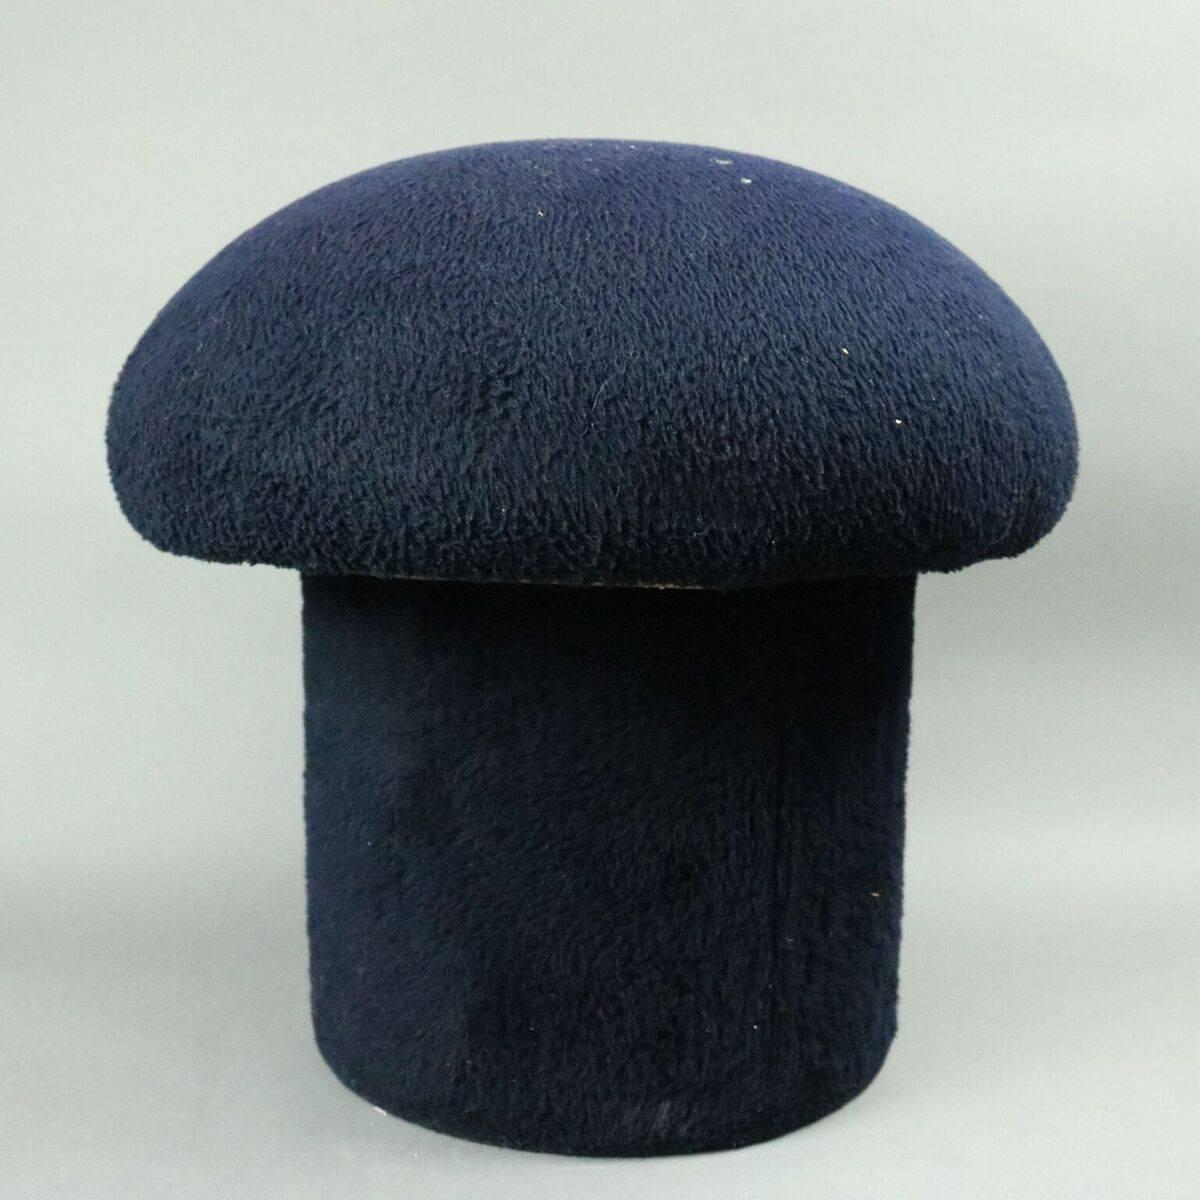 Mid-Century Modern mushroom shaped sculptural footstool features overall navy blue upholstery, circa 1960

Measures: 18" height x 19" diameter.